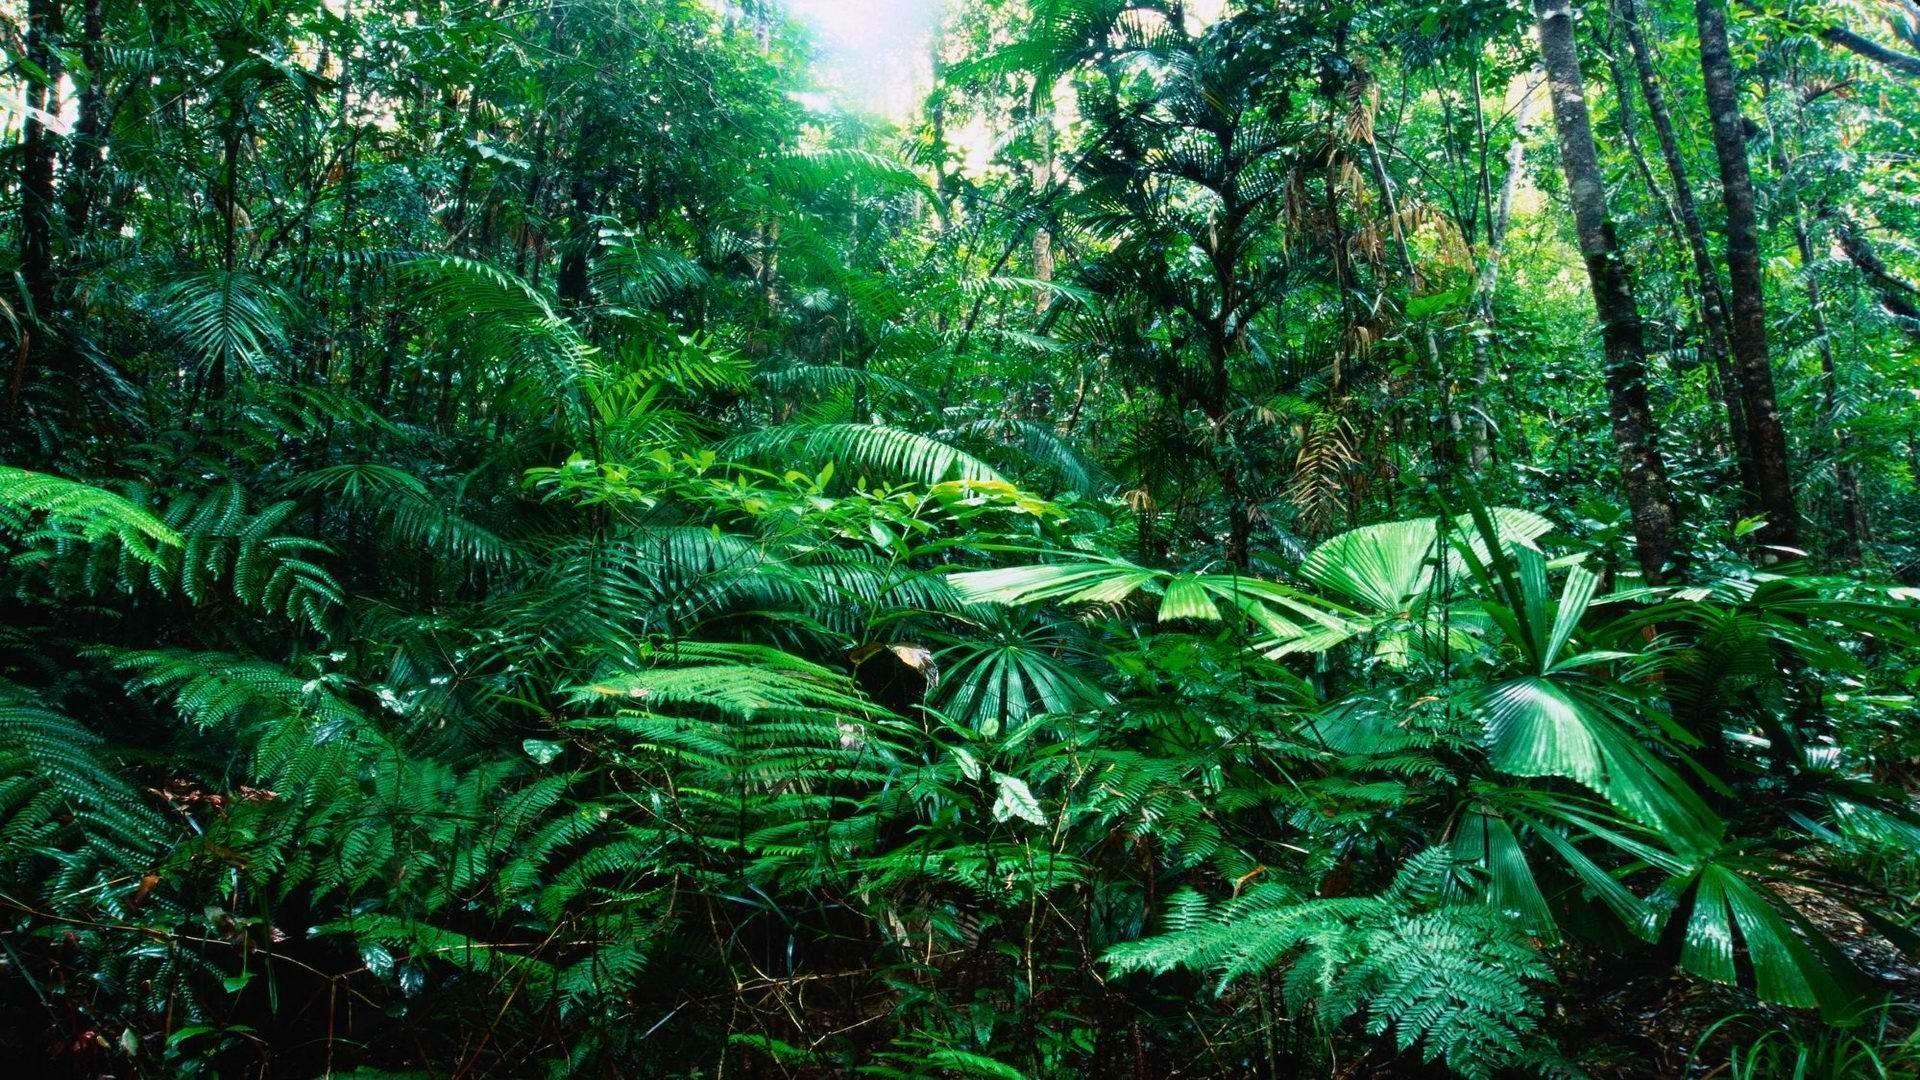 The rainforest is a lush, green and humid environment - Jungle